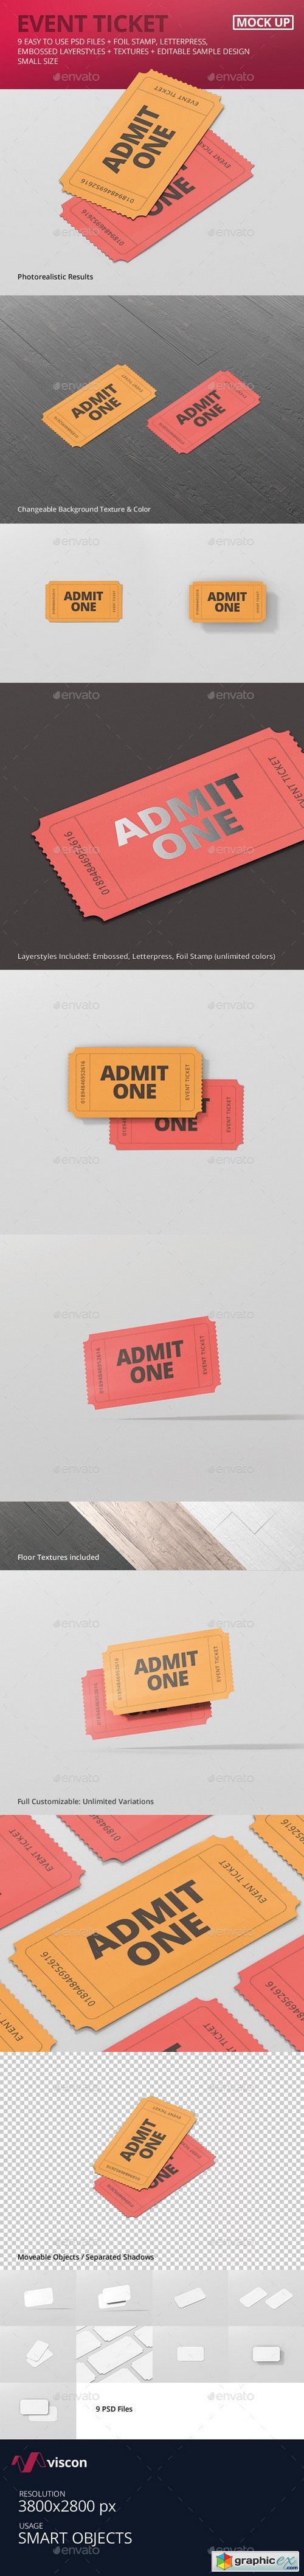 Event Ticket Mockup - Small Size